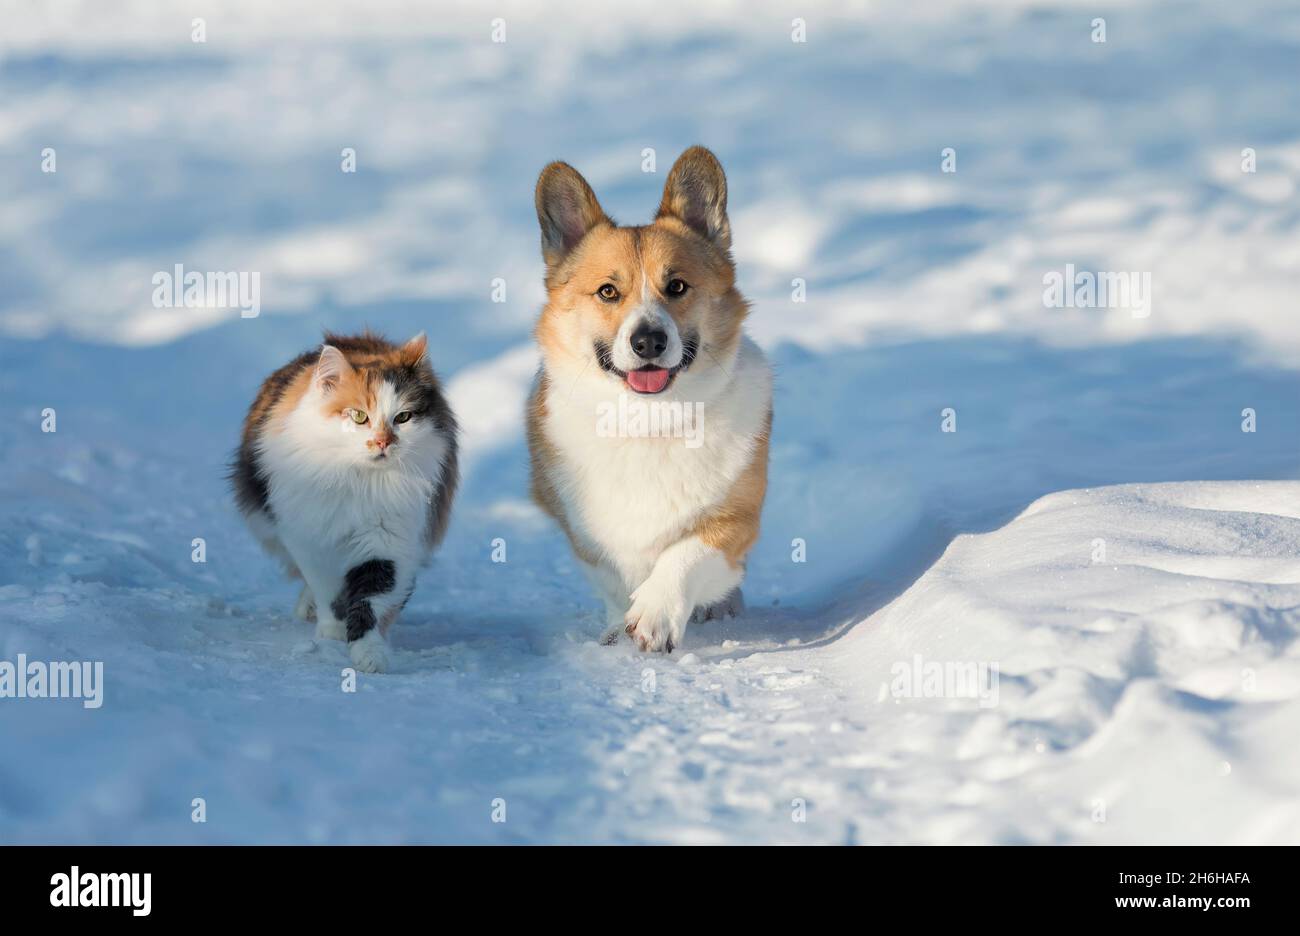 fluffy dog friends corgi and cat walk on a snowy road in the winter garden Stock Photo